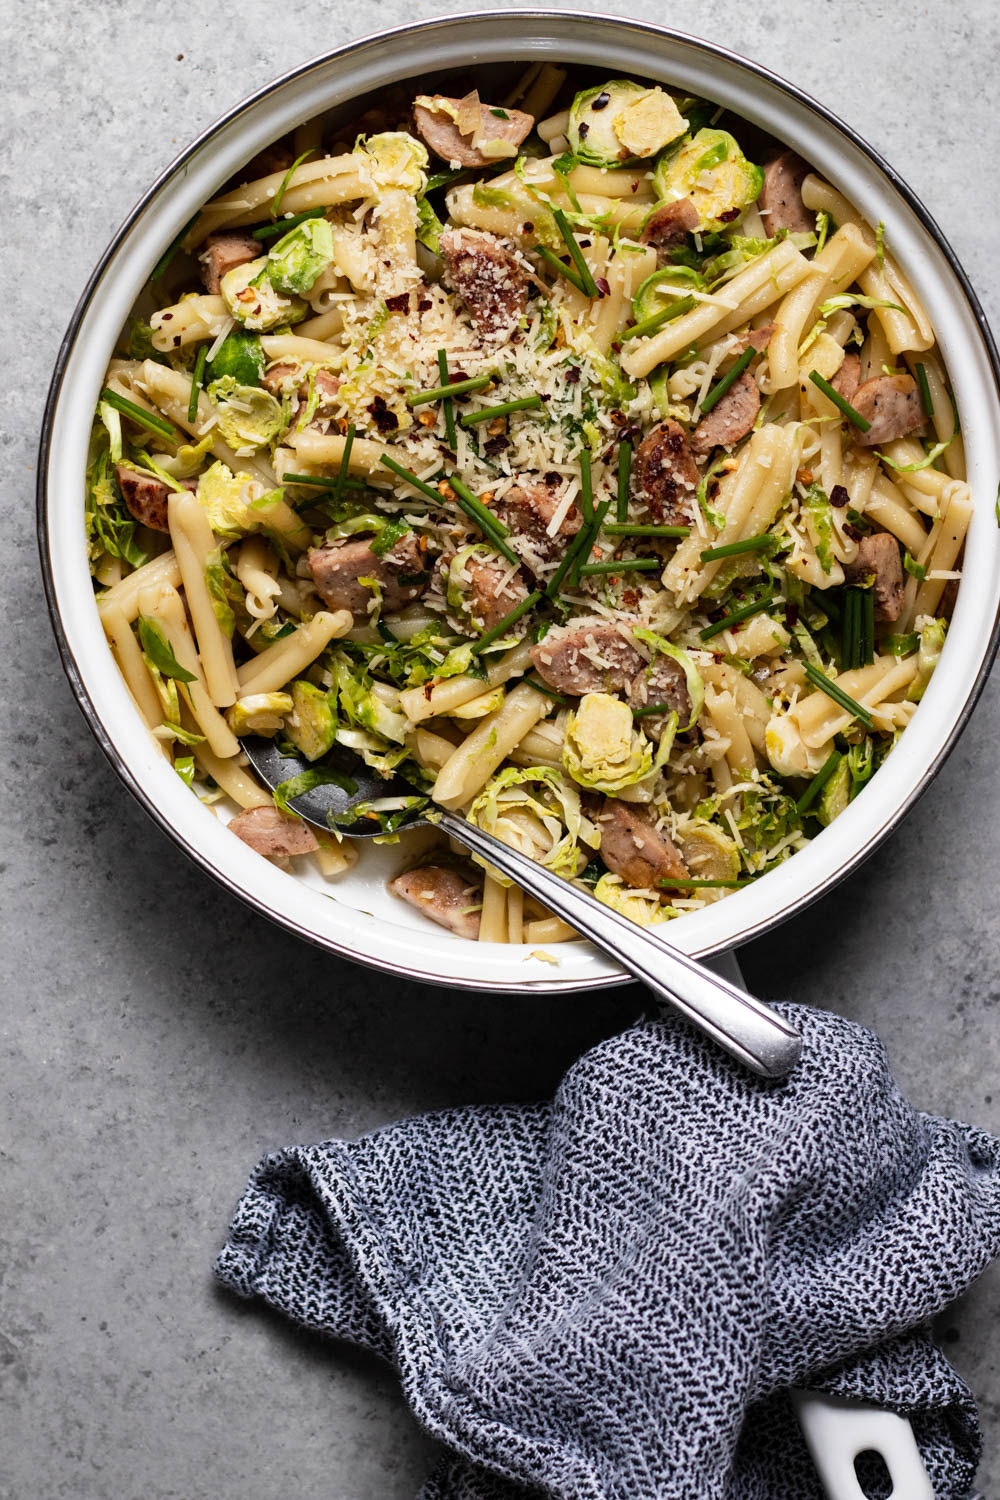 It's easy to make your own patty sausage with just a few healthy ingredients like ground chicken, apples, onion and savory spices like sage and fennel. One Pot Pasta With Brussel Sprouts And Chicken Apple Sausage Amanda Frederickson